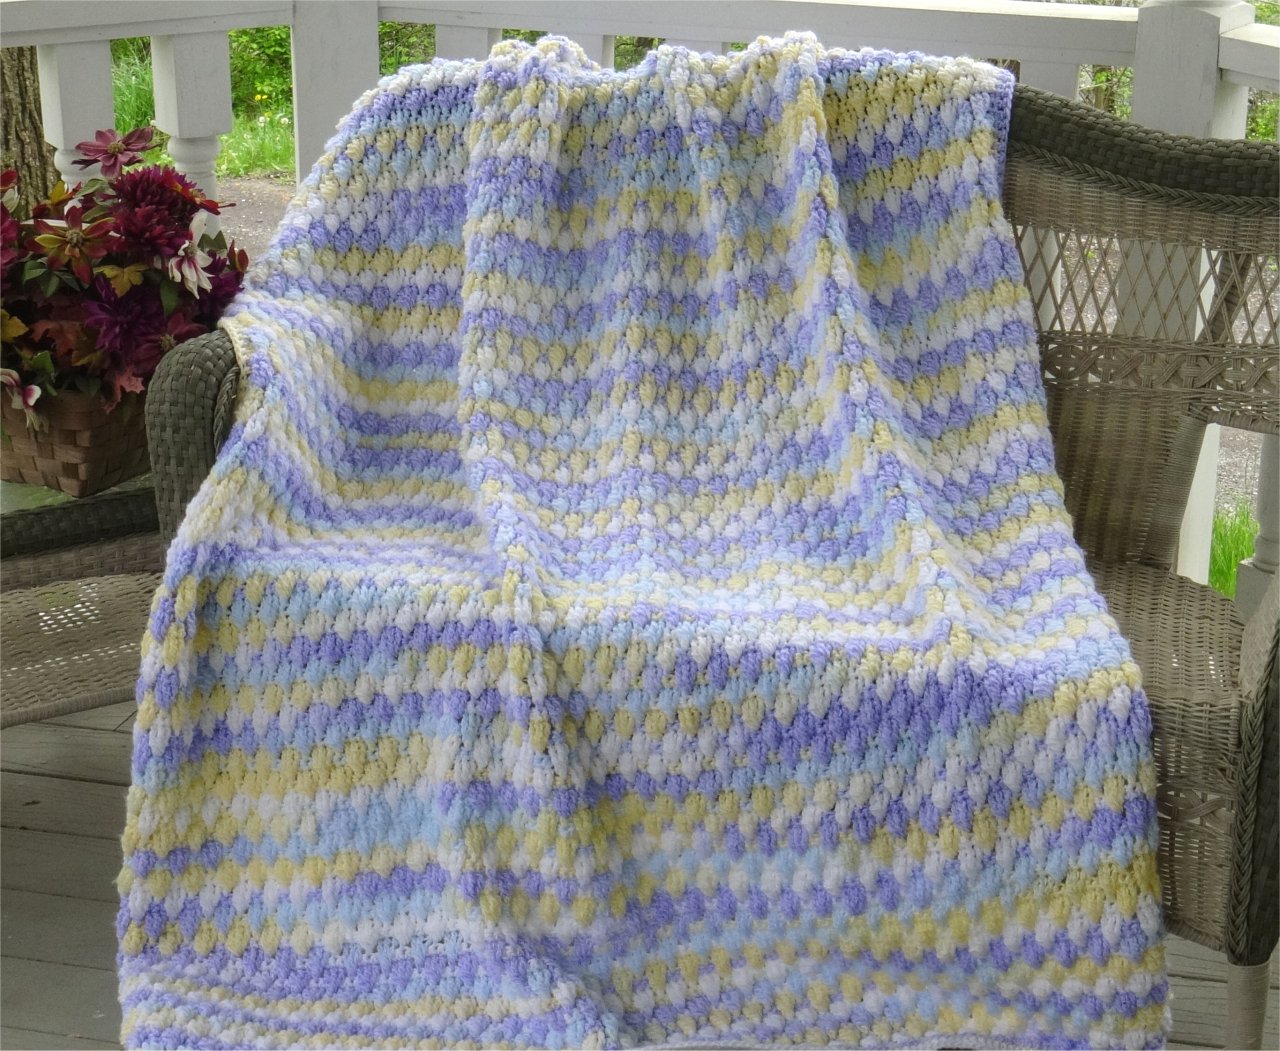 Sunny Day Shell Afghan Pattern